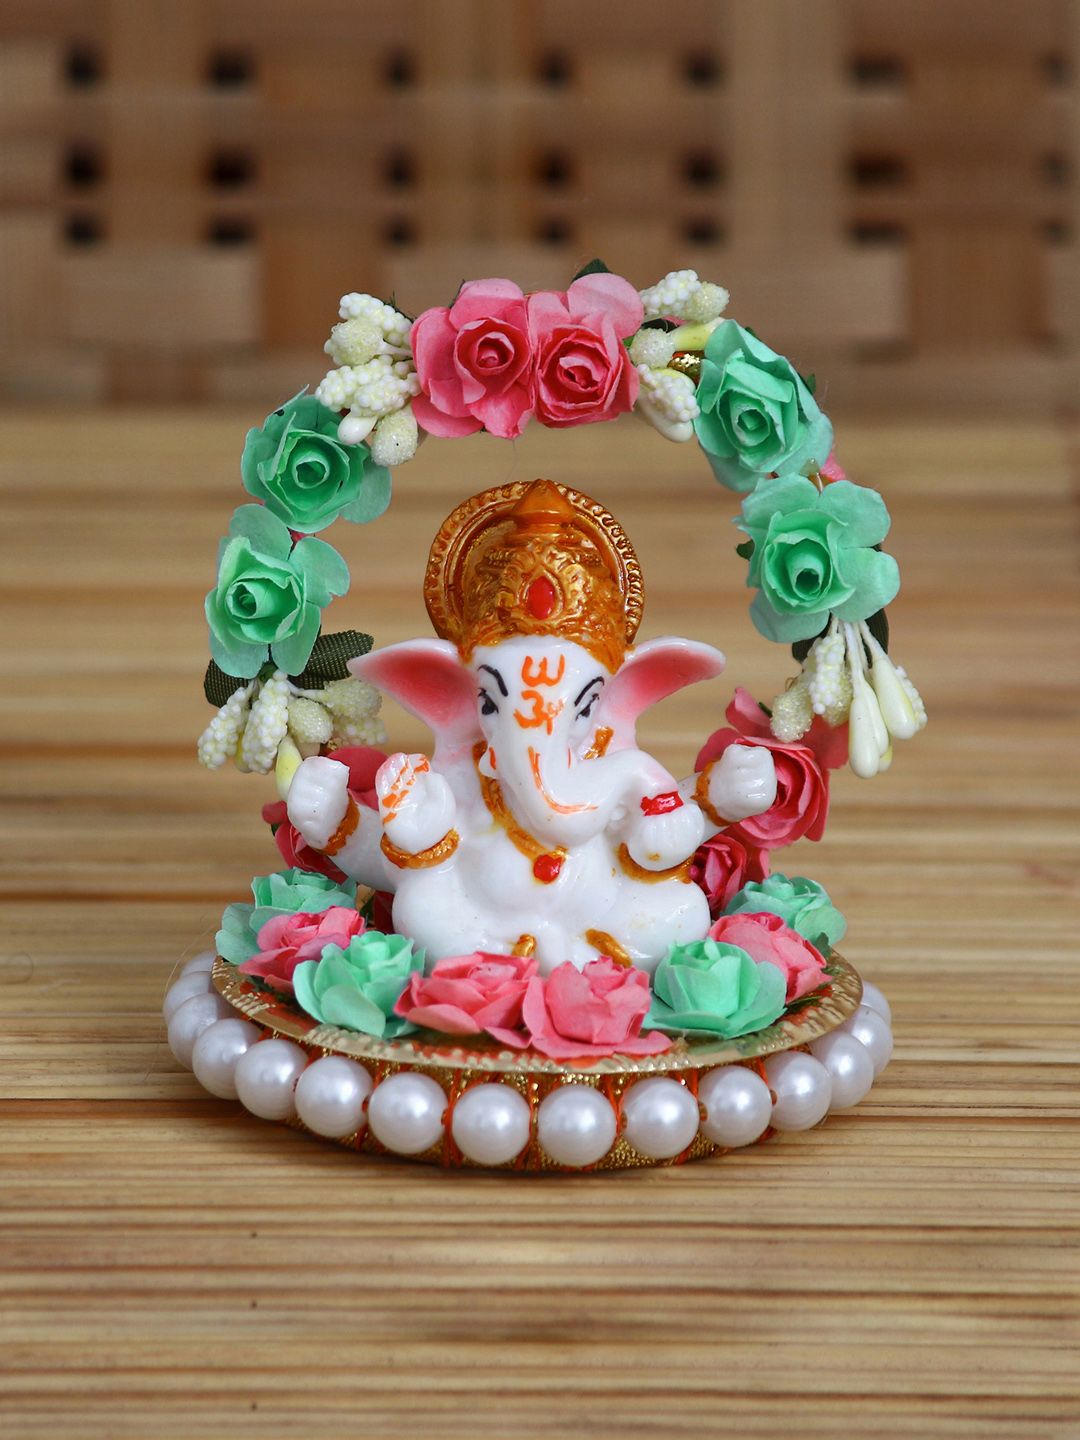 eCraftIndia White & Green Handcrafted Lord Ganesha On Decorative Plate With Throne Of Flowers Showpiece Price in India